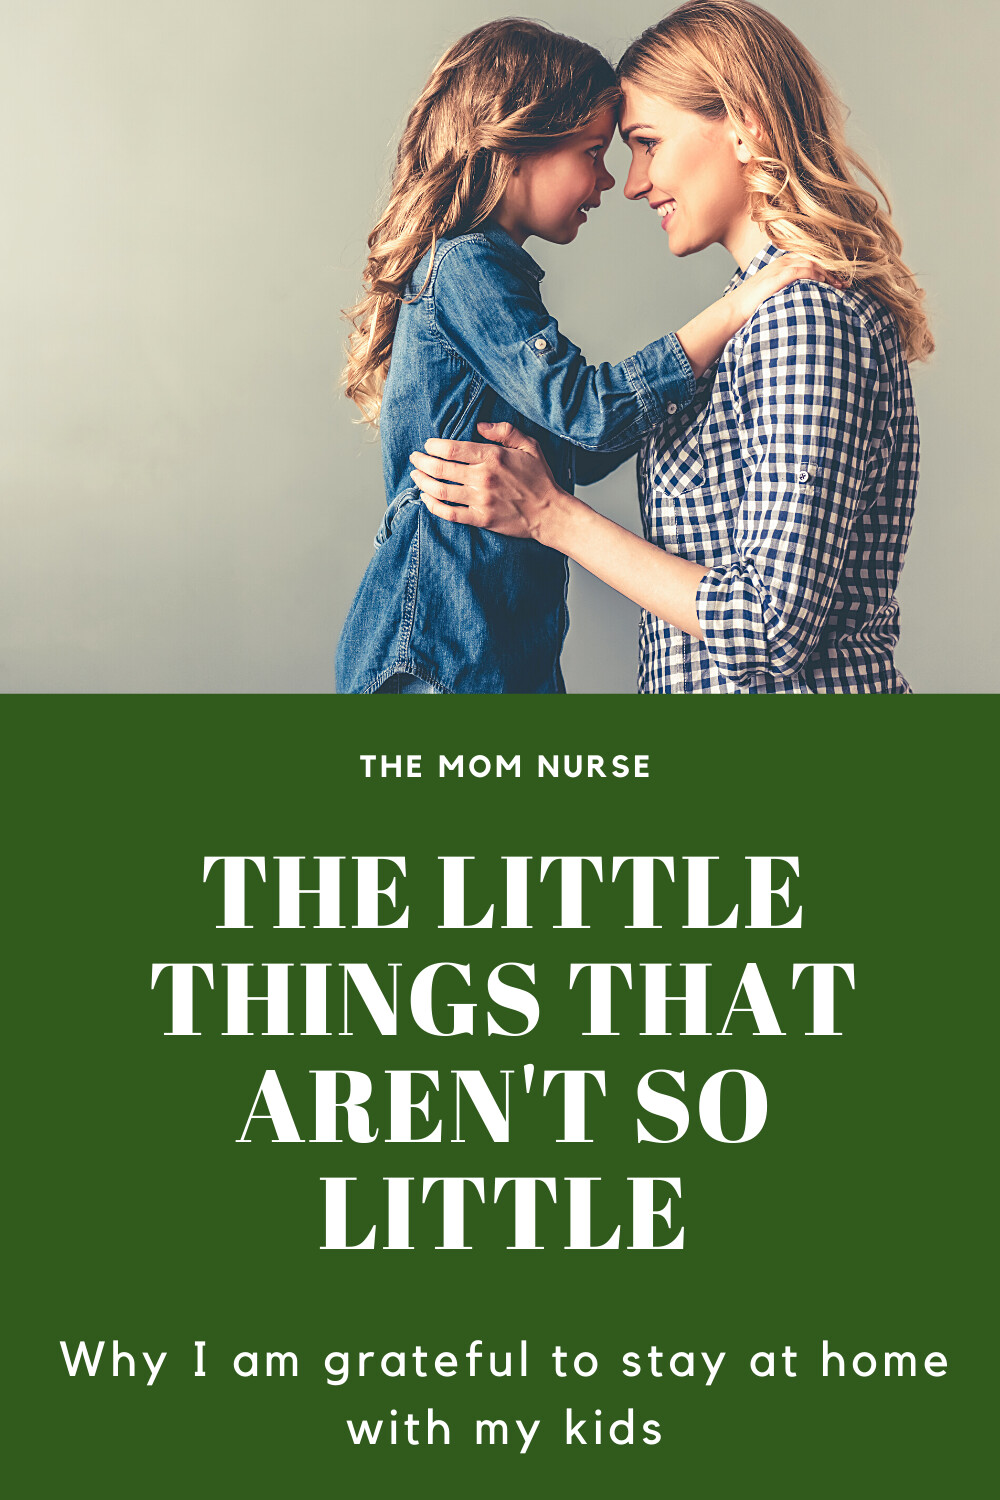 When the little things aren't so little after all-Staying home with your littles